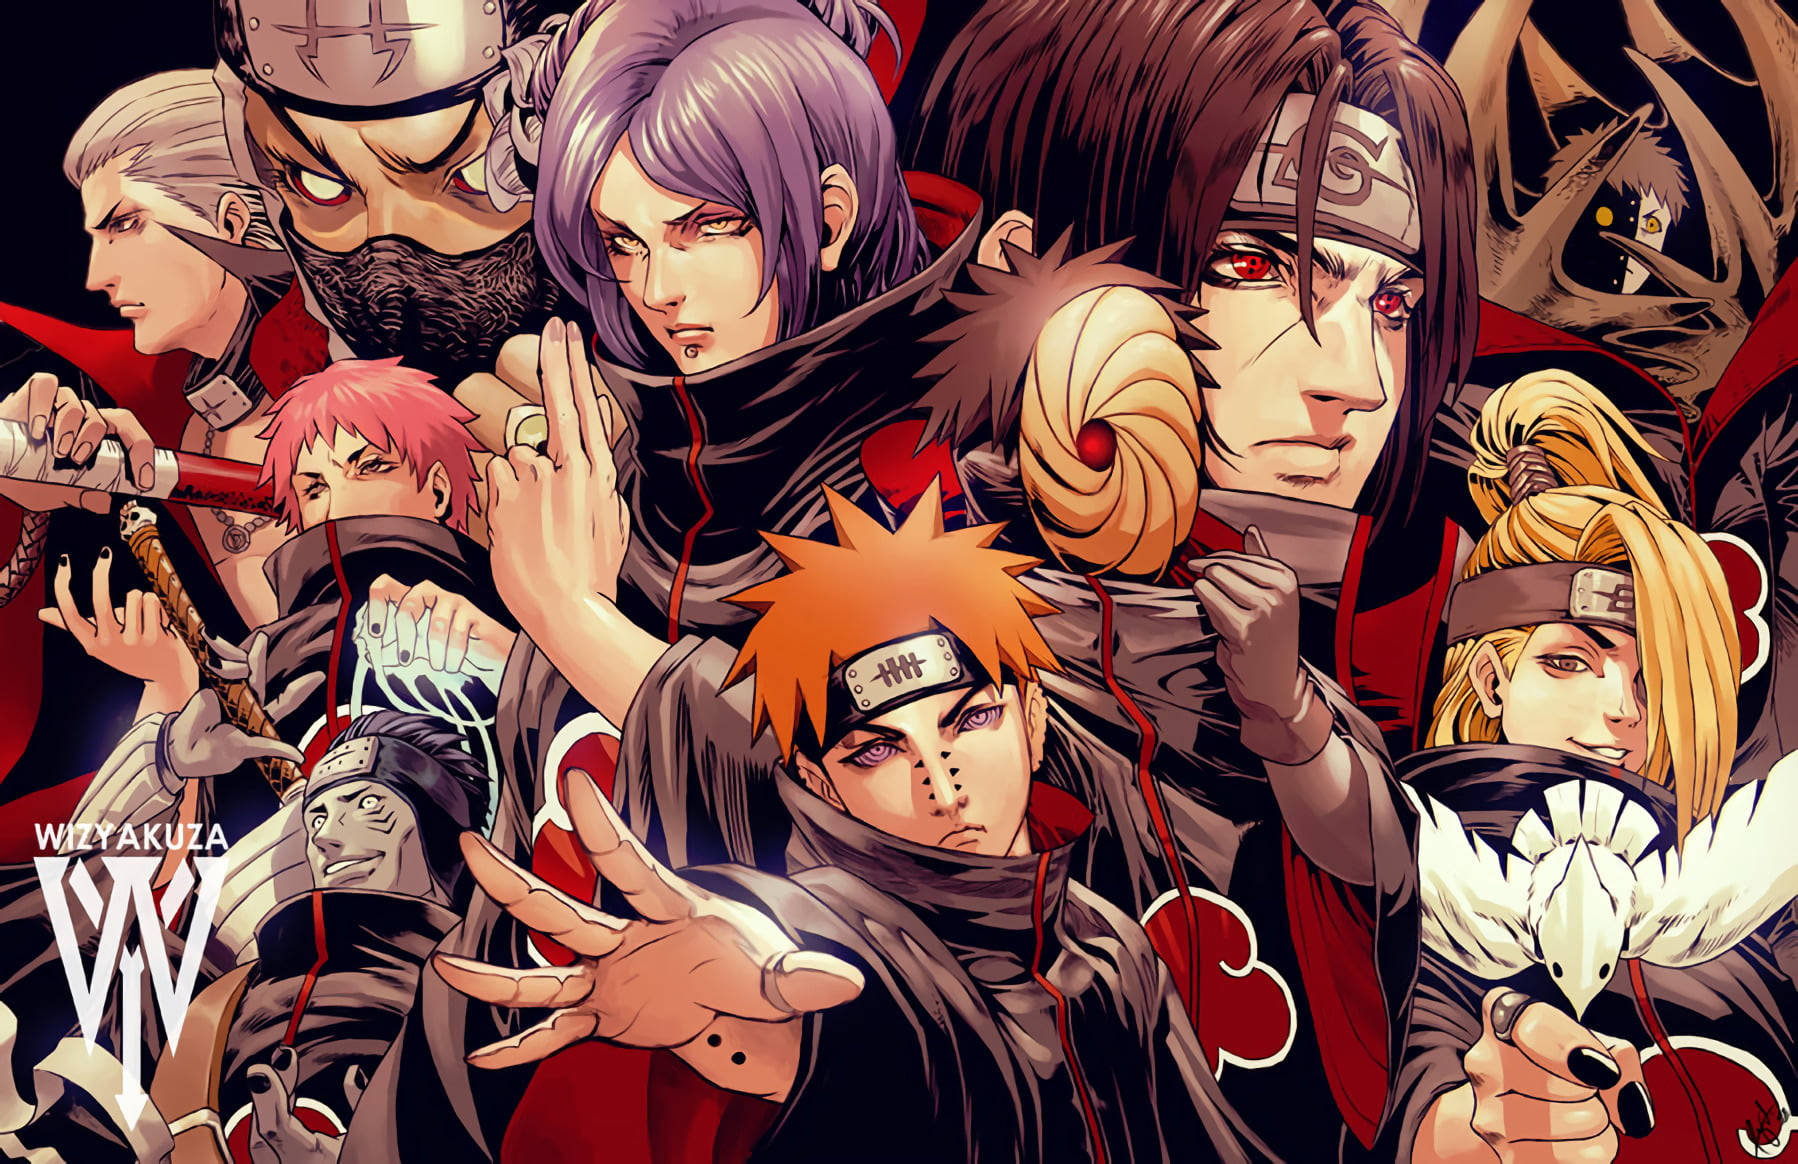 Free Naruto Poster Wallpaper Downloads, [100+] Naruto Poster Wallpapers for  FREE 